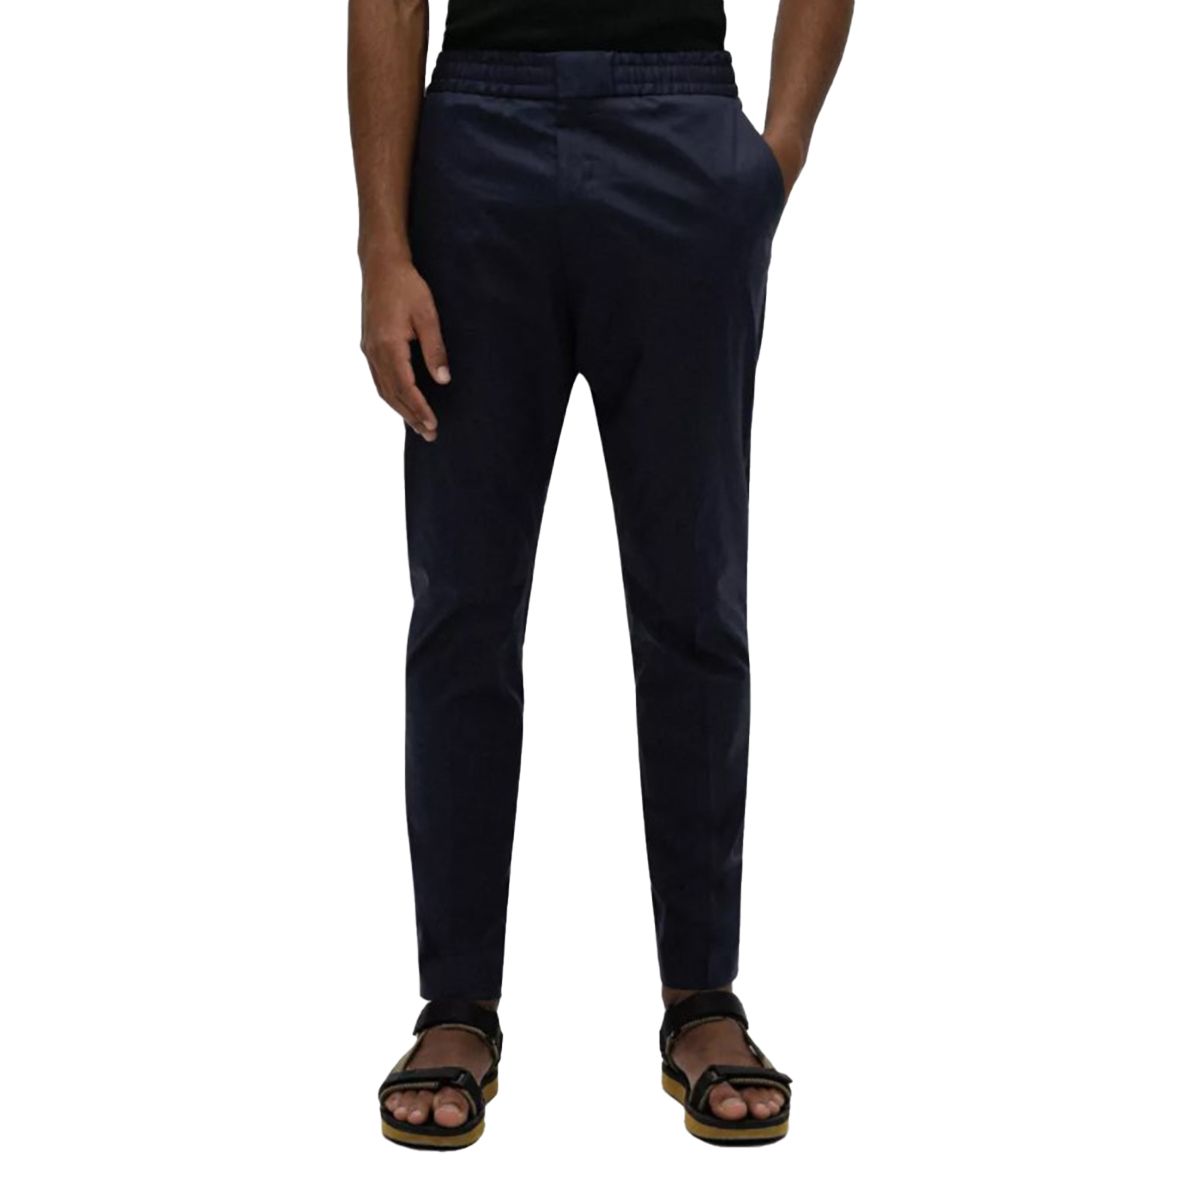 Extra-Slim-Fit Cotton Trousers